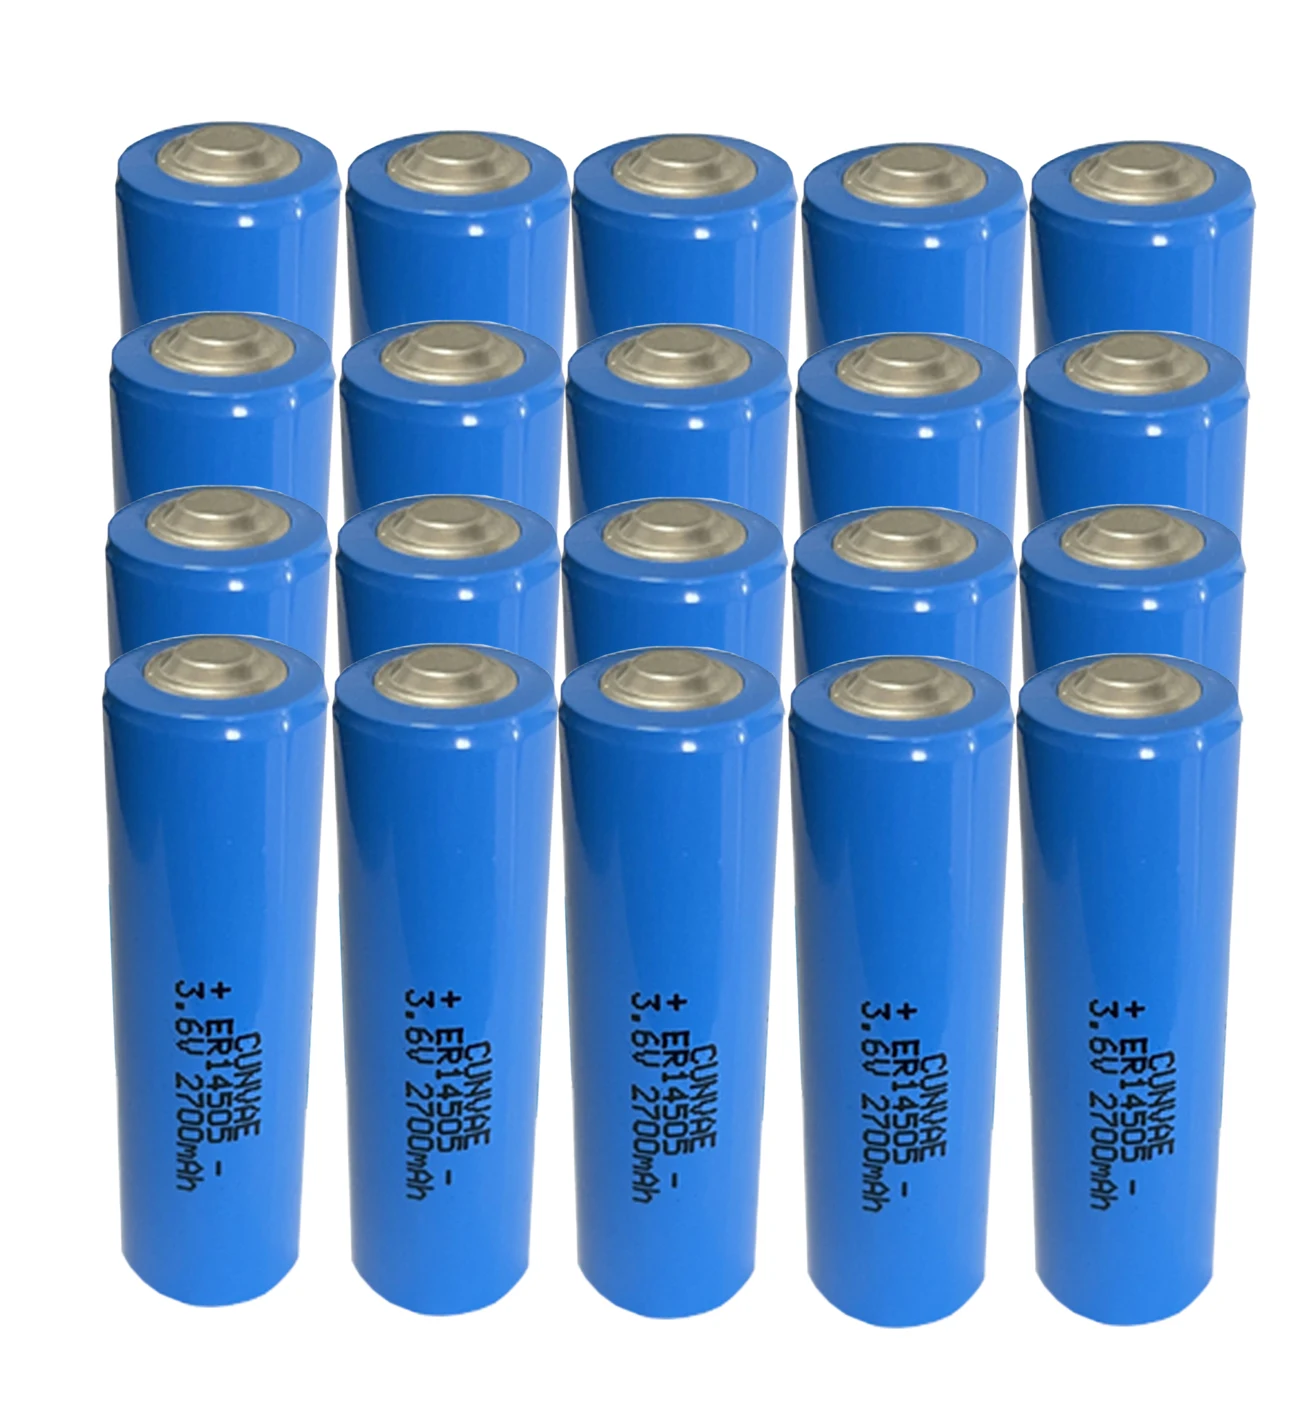 

20PCS ER14505 AA Lithium Battery 3.6V 14505 LS14505 2700mAh Rechargeable LiSCLO2 Superior Batteries for GPS Tracking Cameras